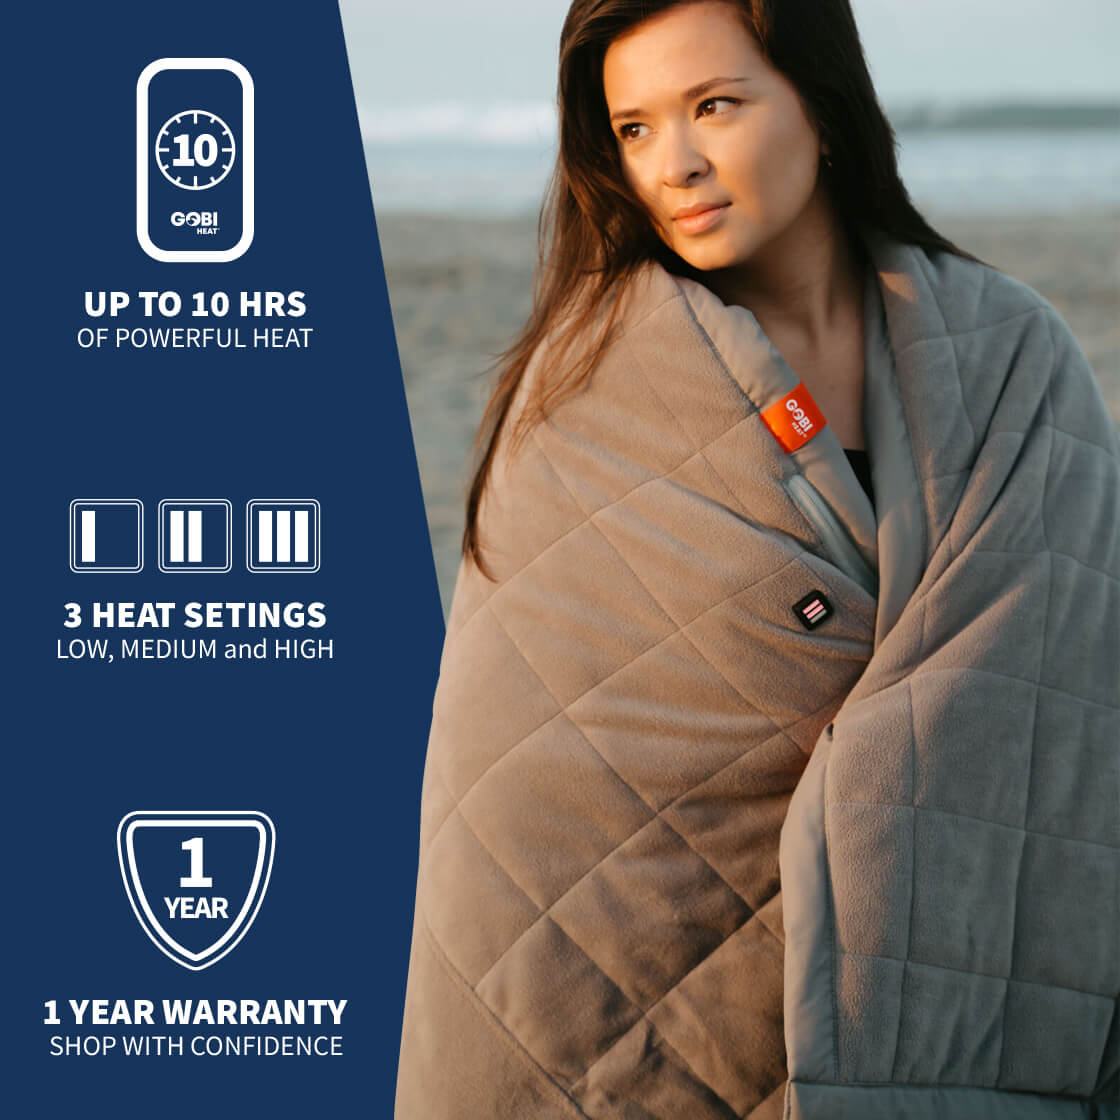 USB Heated Blanket Battery Operated - Upgrade Portable Electric Blanket  Rechargeable Cordless Heating Blanket Throw for Camping Outdoor (Grey, 75 x